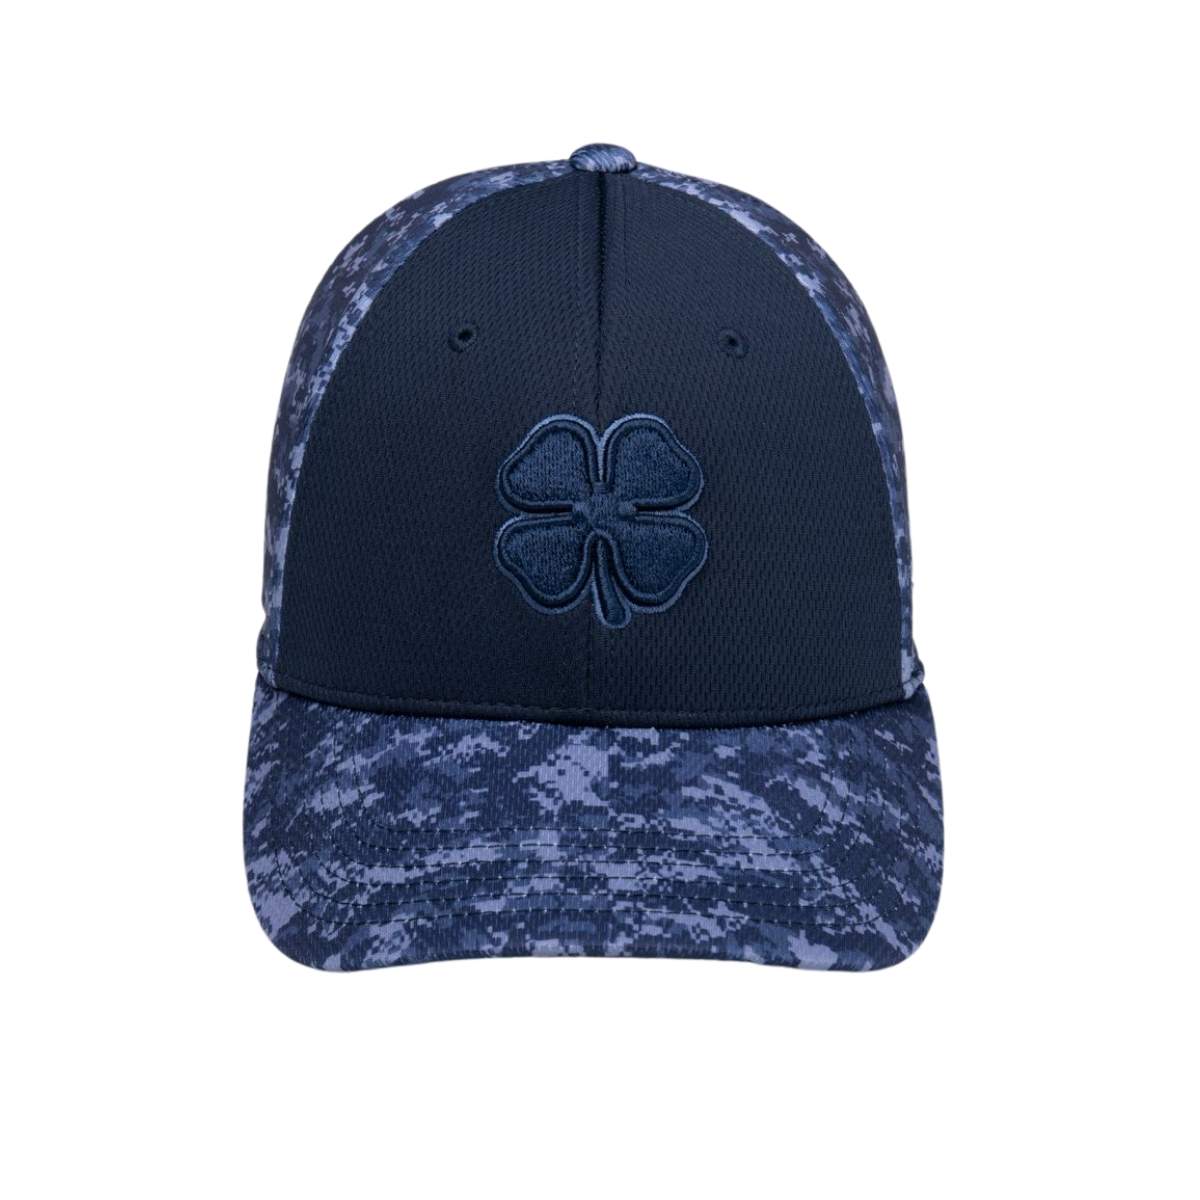 Black Clover BC Freedom #9 Fitted Hat